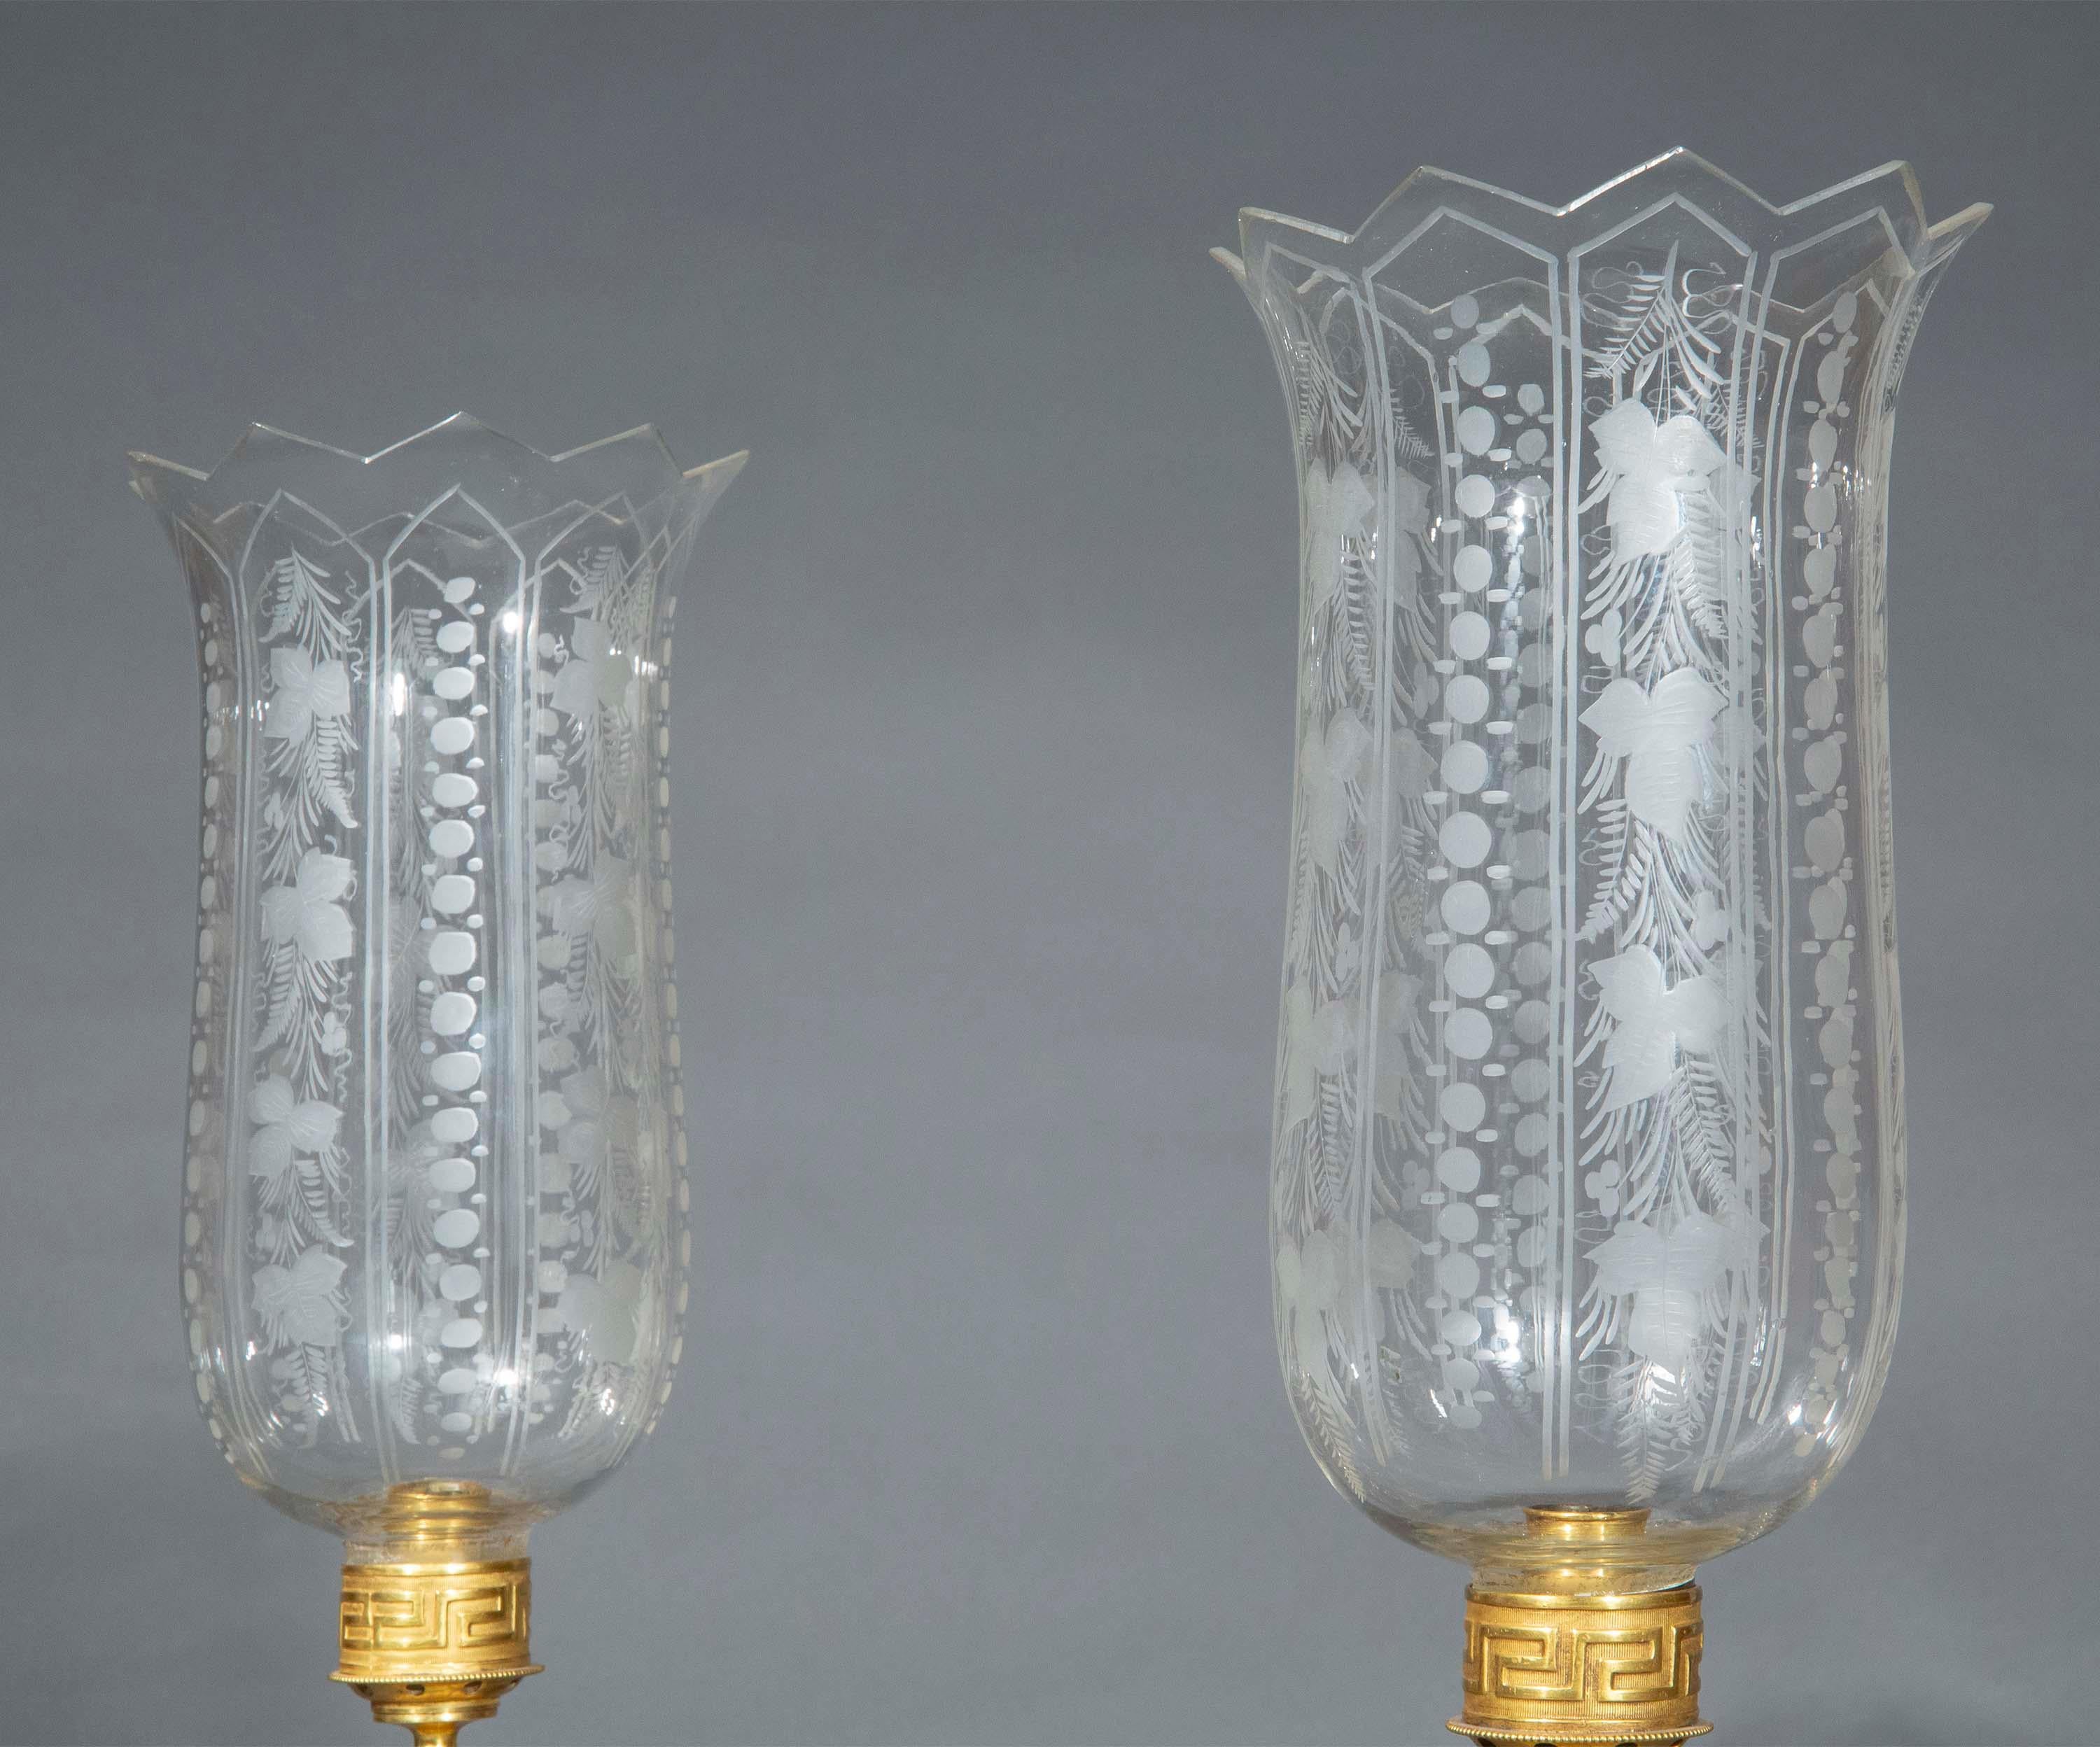 Pair of Early 19th Century Triton Candlesticks Storm Lanterns by Wood & Caldwell In Good Condition For Sale In London, GB